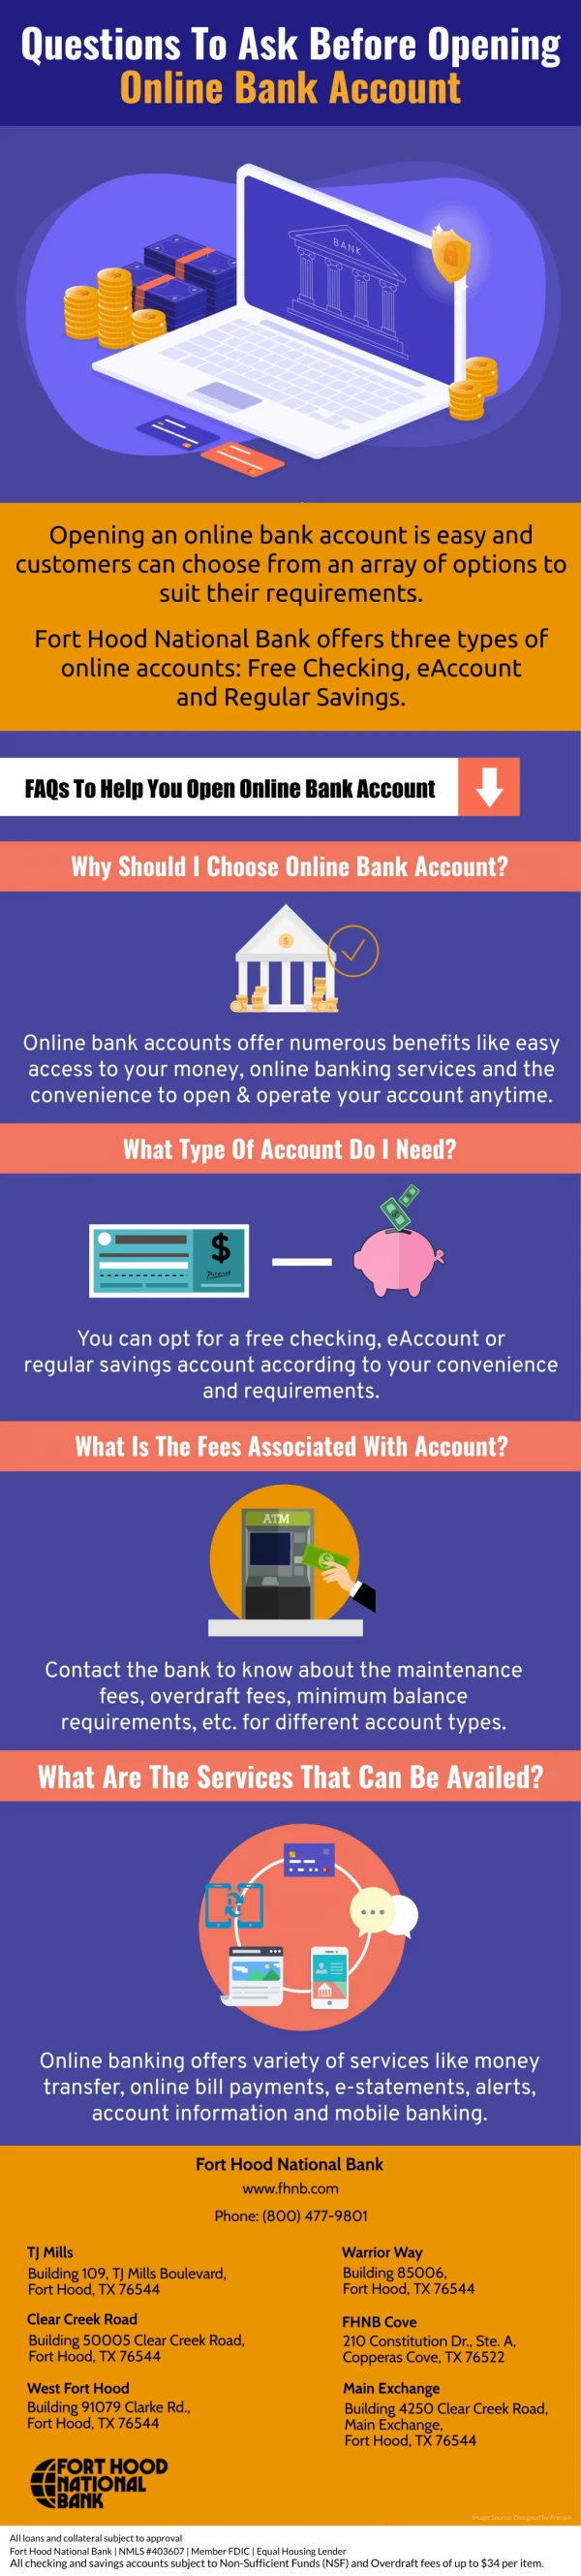 Questions To Ask Before Opening Online Bank Account